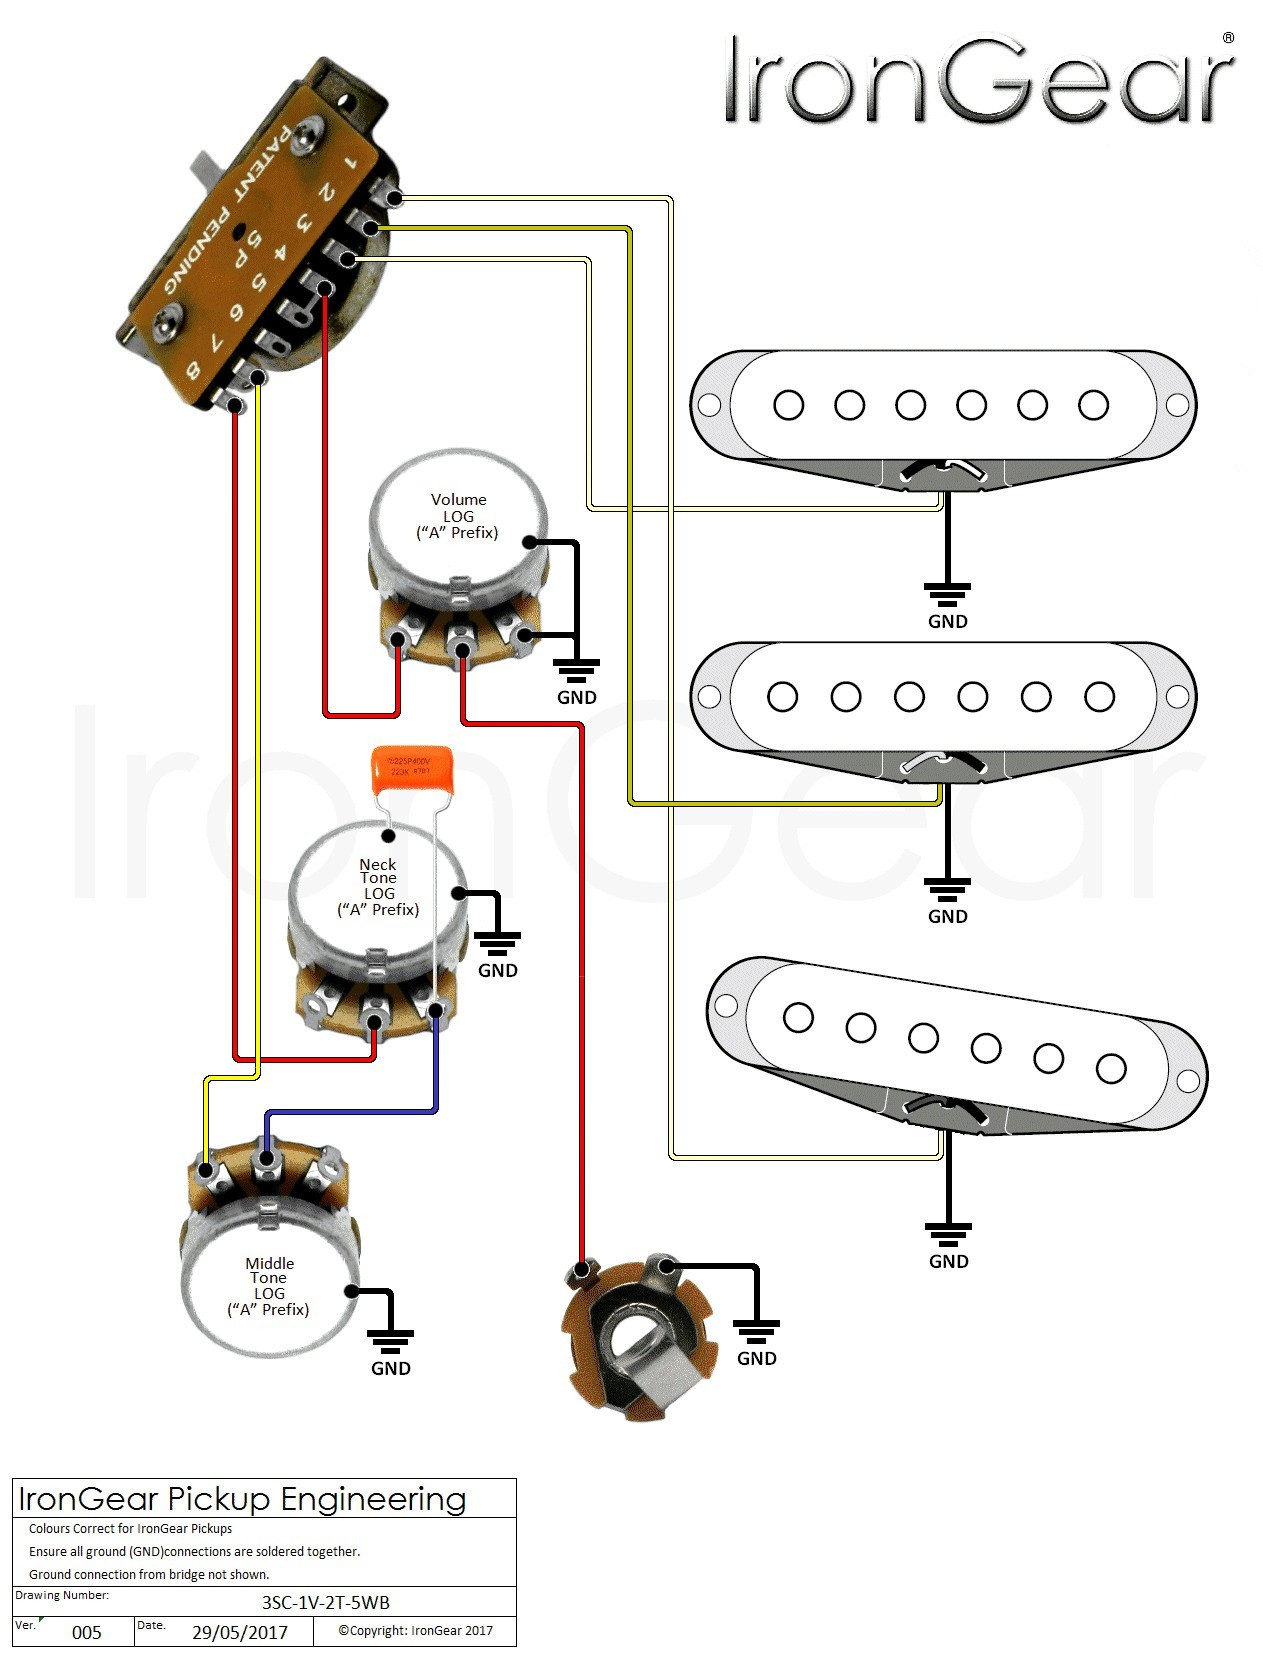 Wire 3 Way Switch Guitar Refrence Stratocaster Wiring Diagram 3 Way Switch Save Electric Guitar Wiring